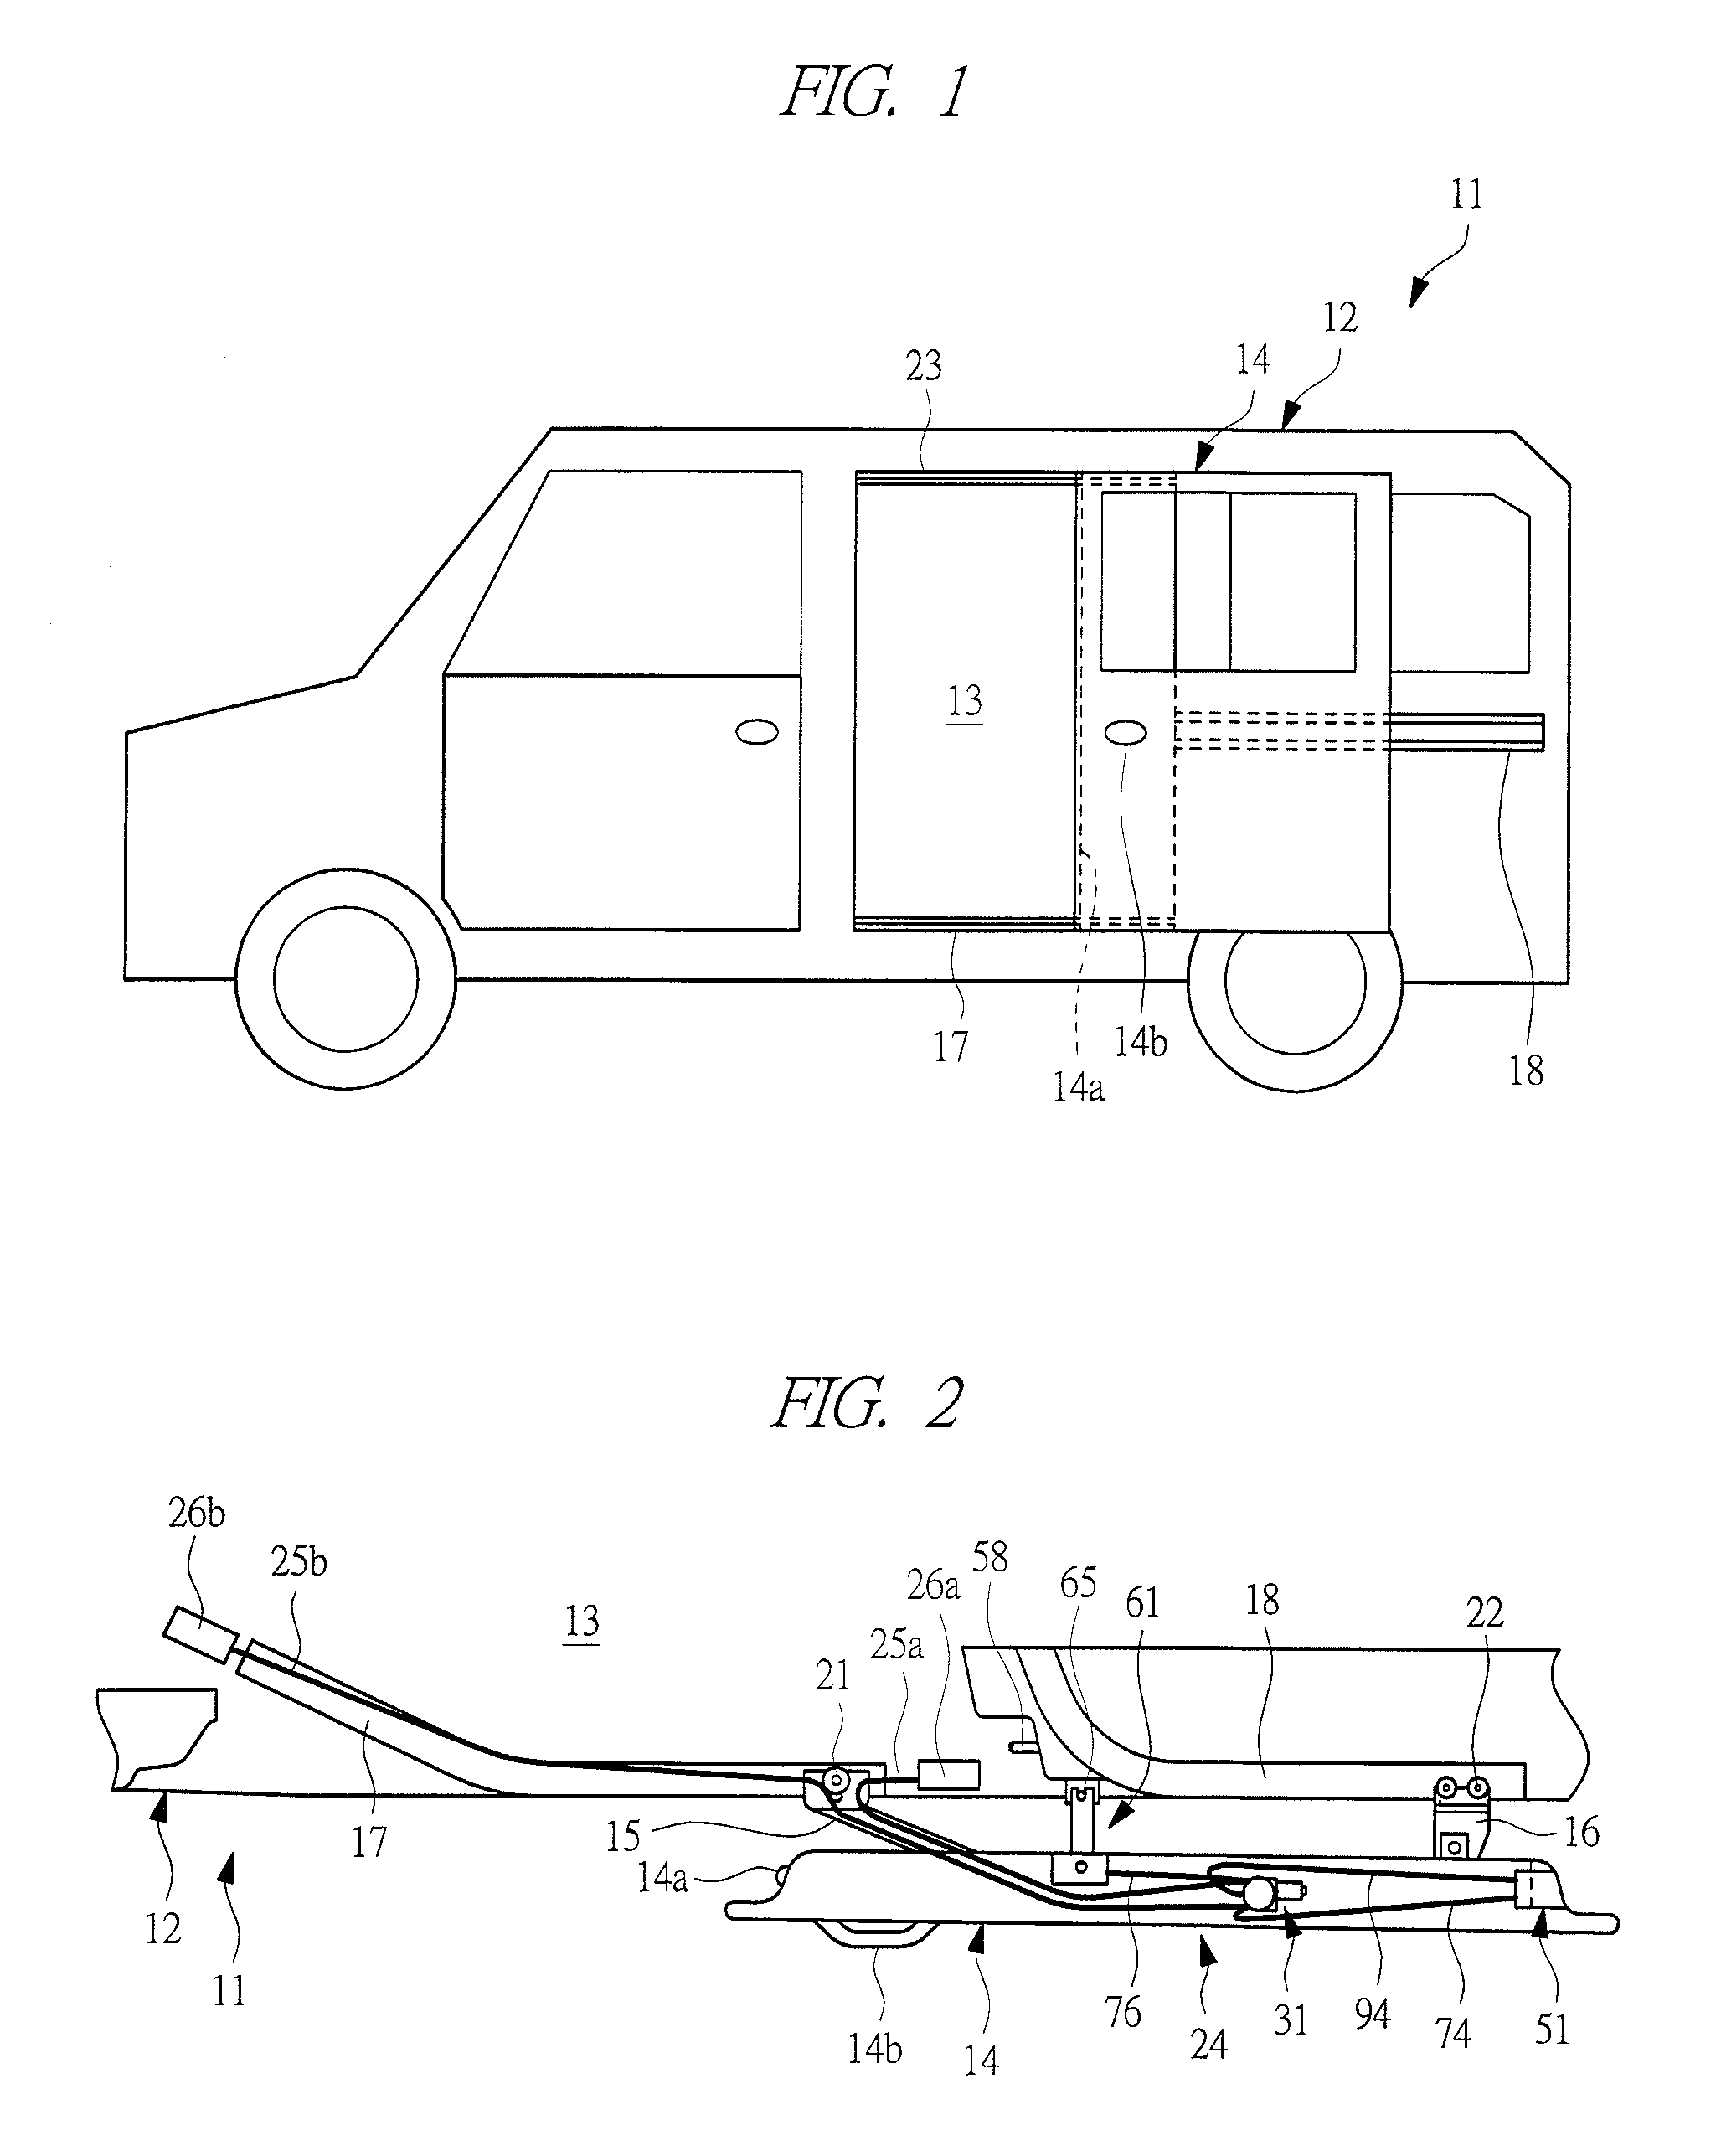 Opening/closing apparatus for vehicle